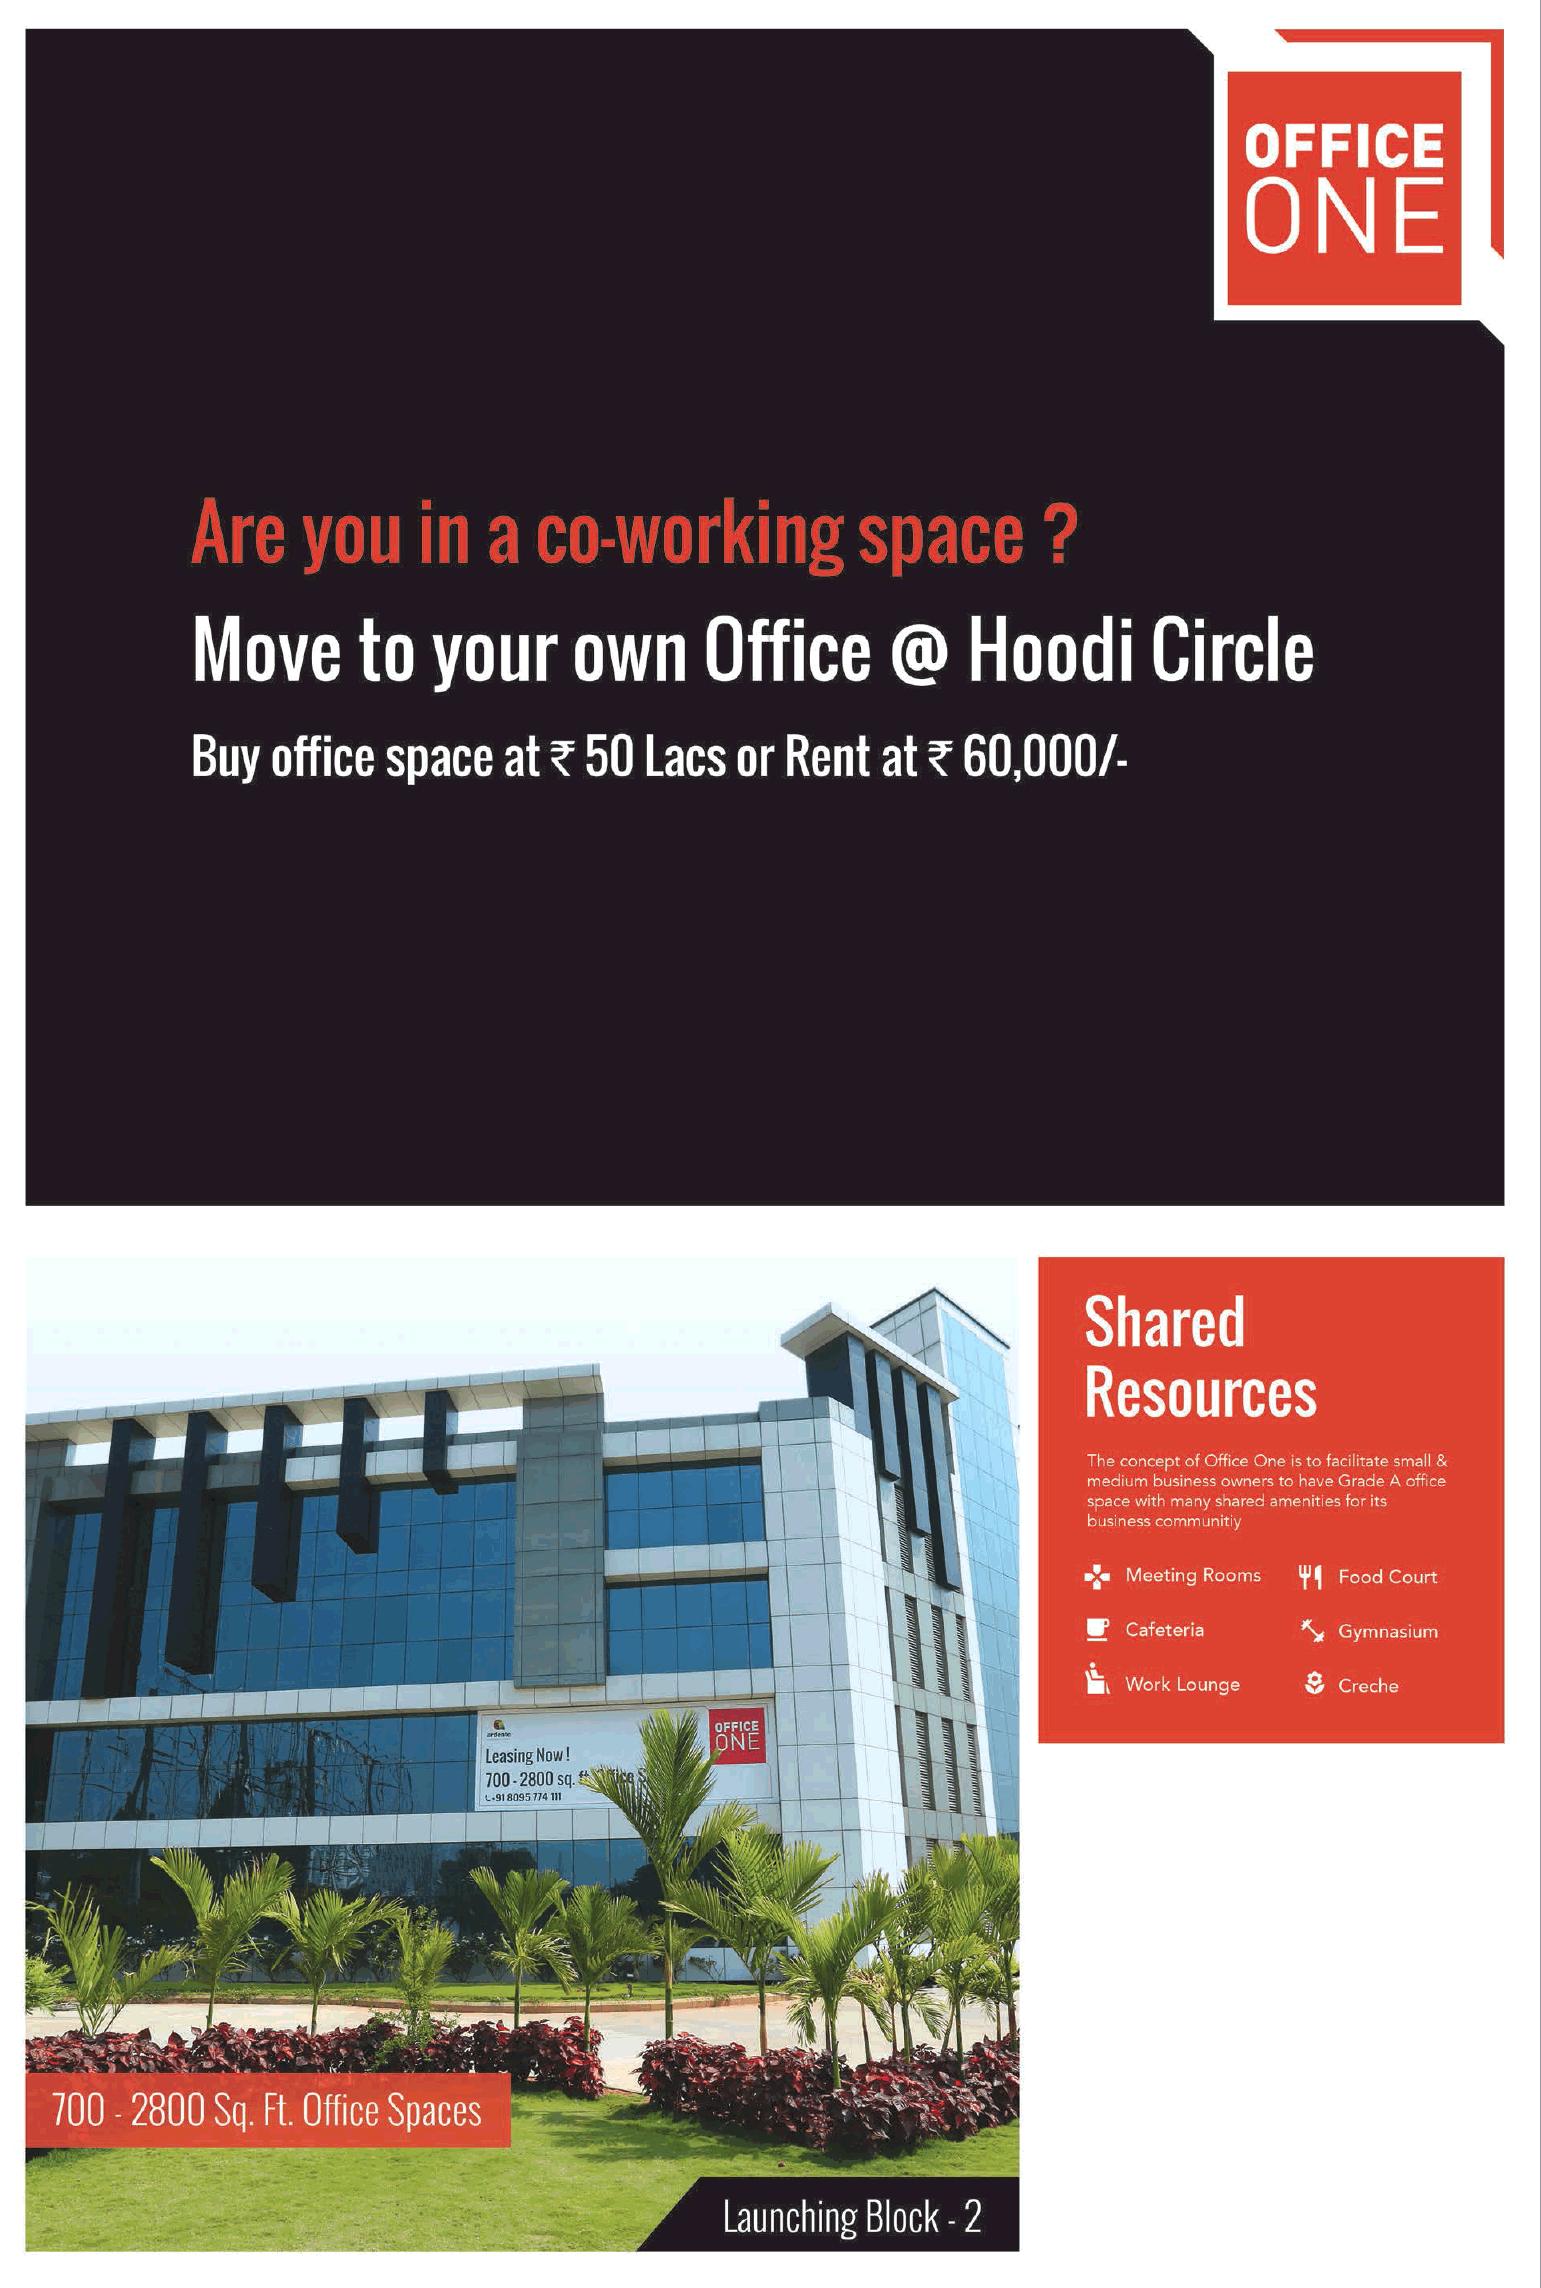 Buy office space @ Rs. 50 Lacs or rent @ Rs. 60000 at Ardente Office One in Bangalore